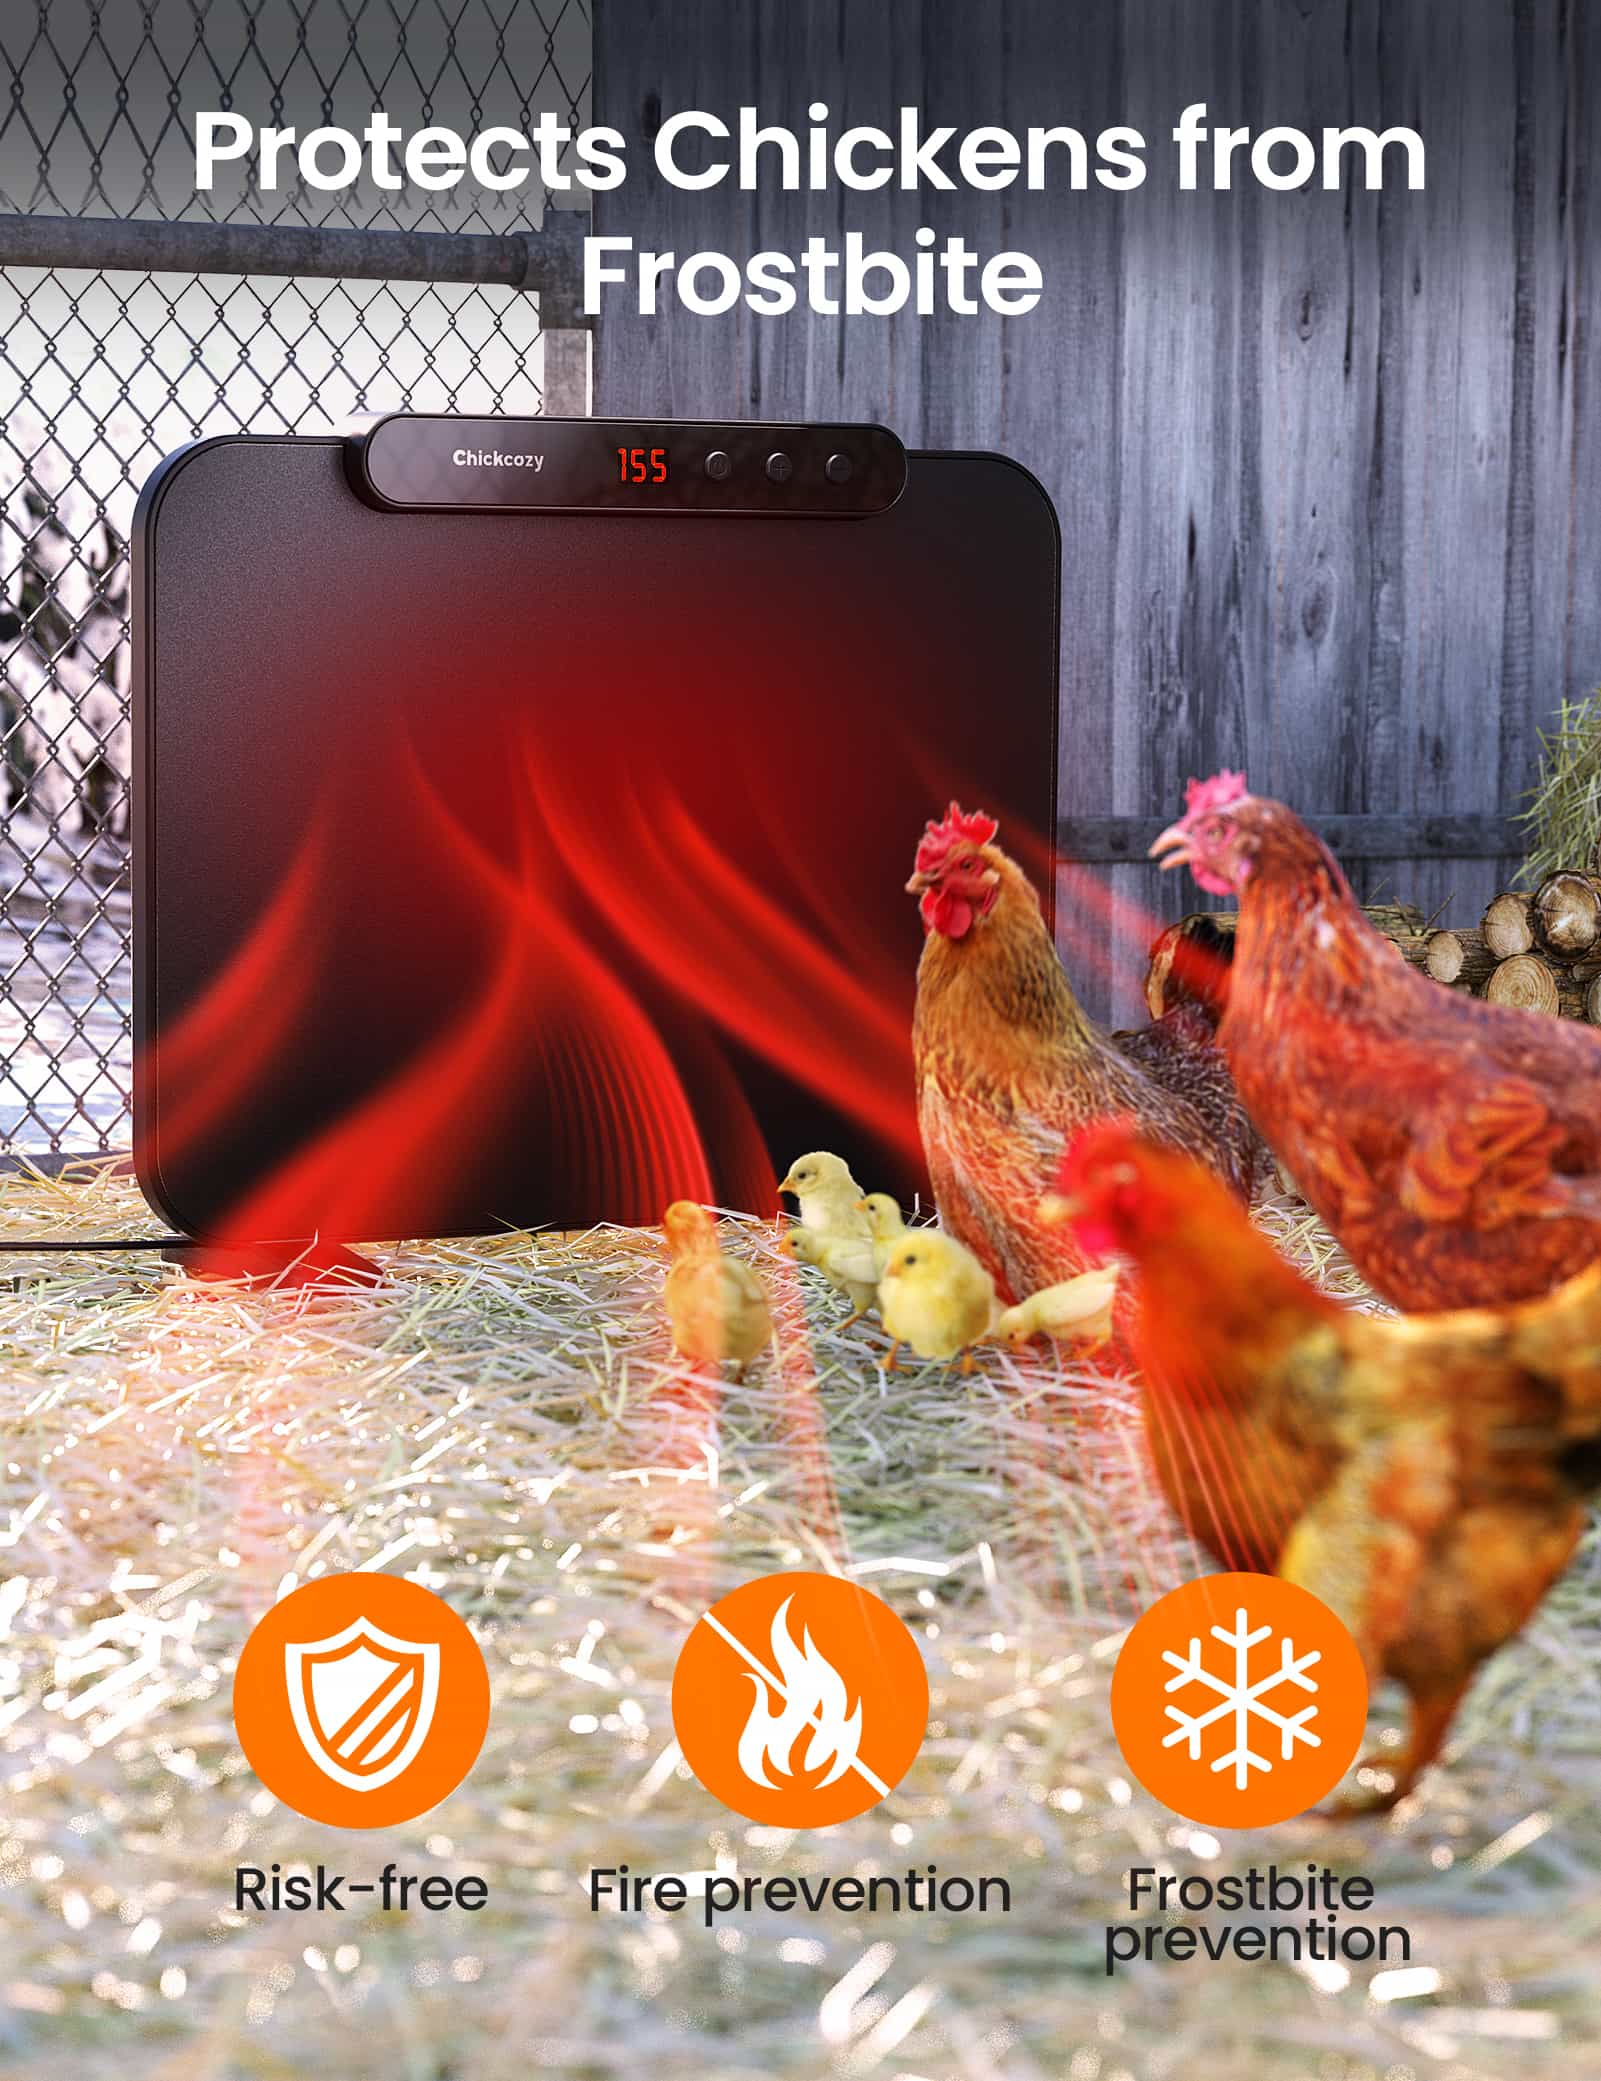 Using the chicken coop heater to prevent from forstbite